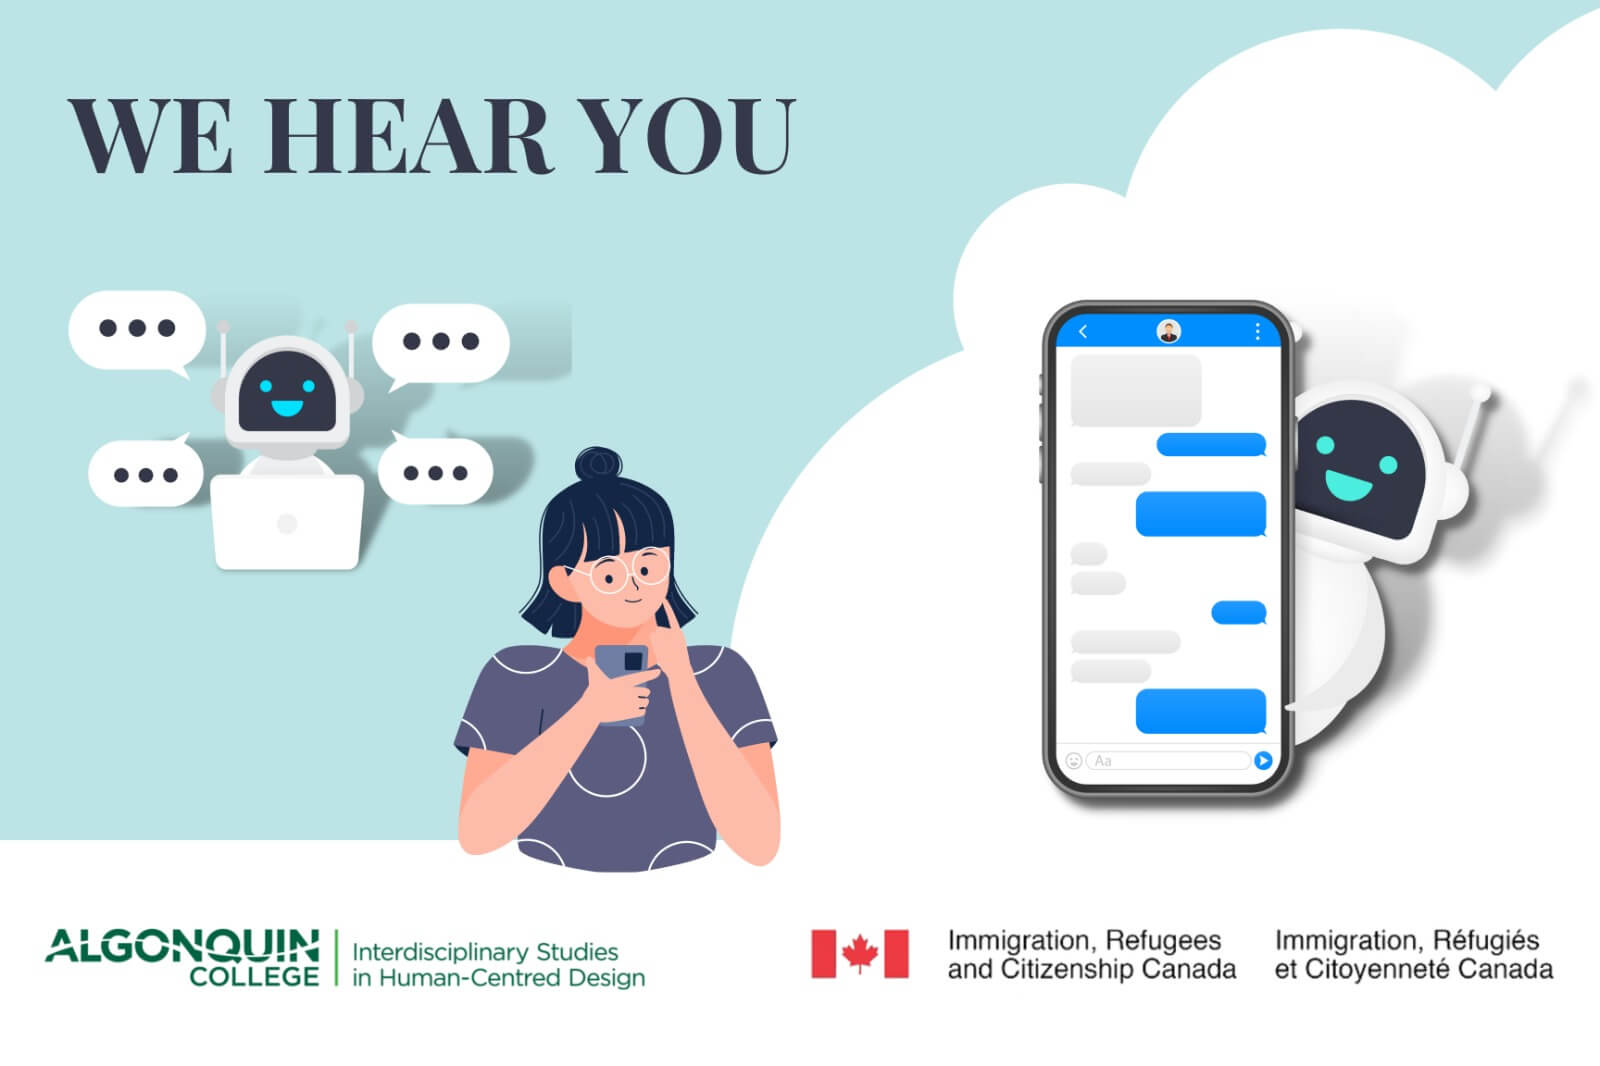 The poster depicts an IRCC client joyfully connecting with a chatbot.